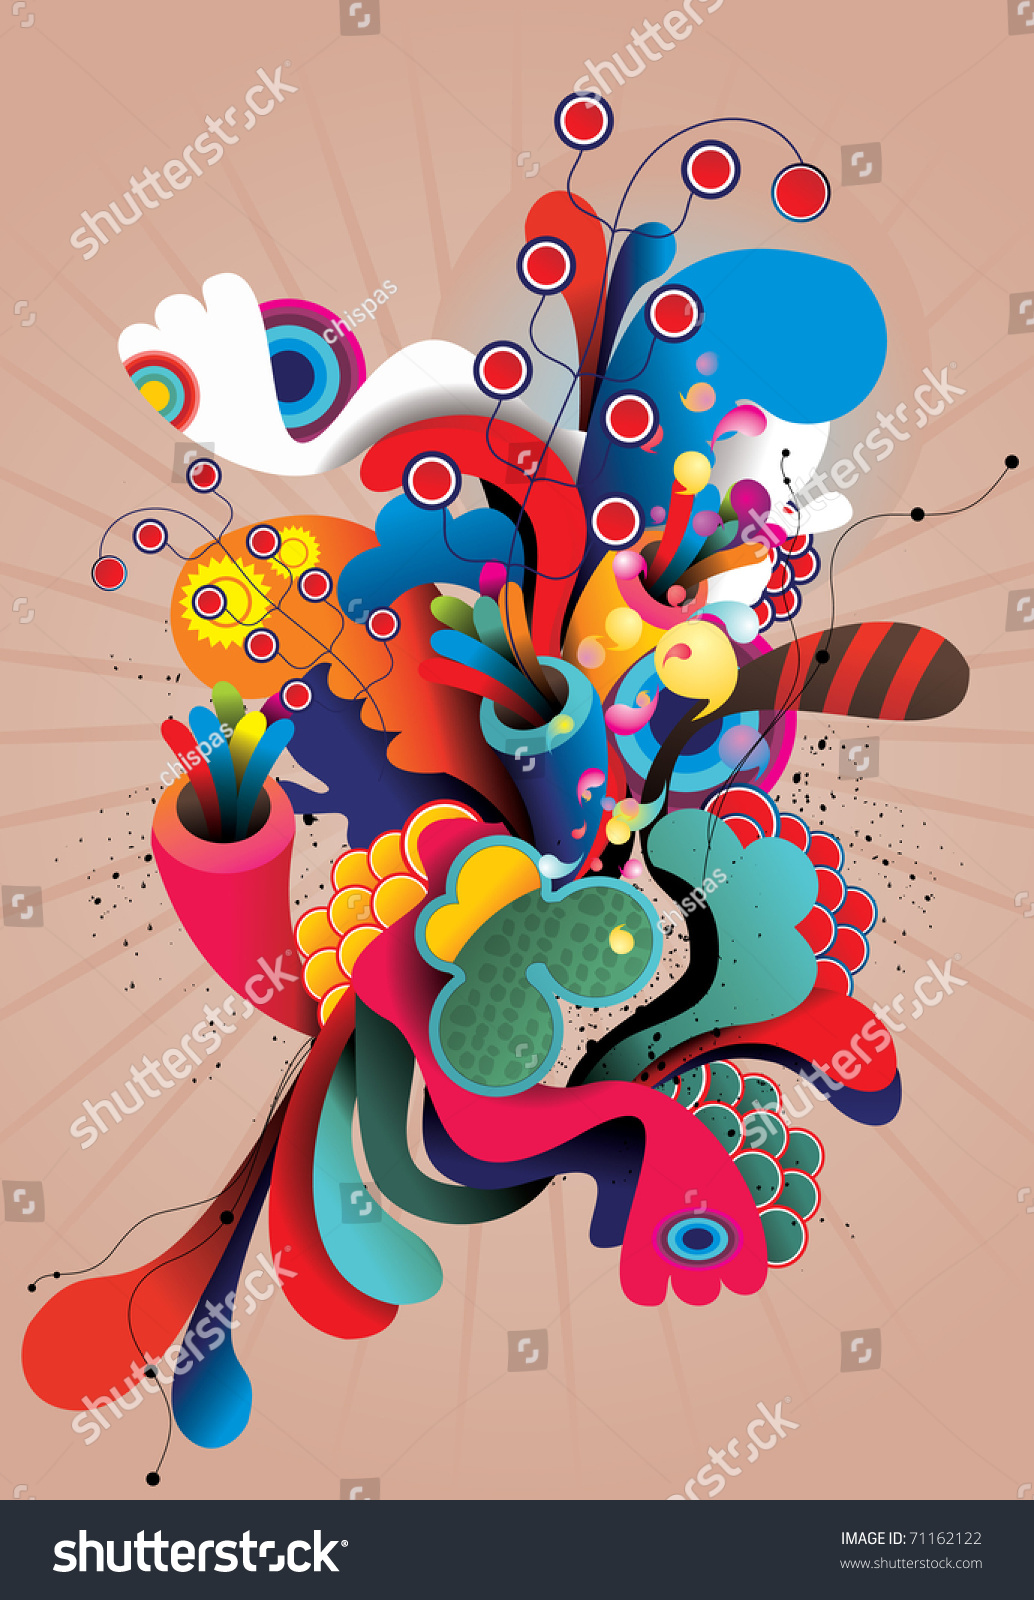 Abstract Color Vector Illustration - 71162122 : Shutterstock